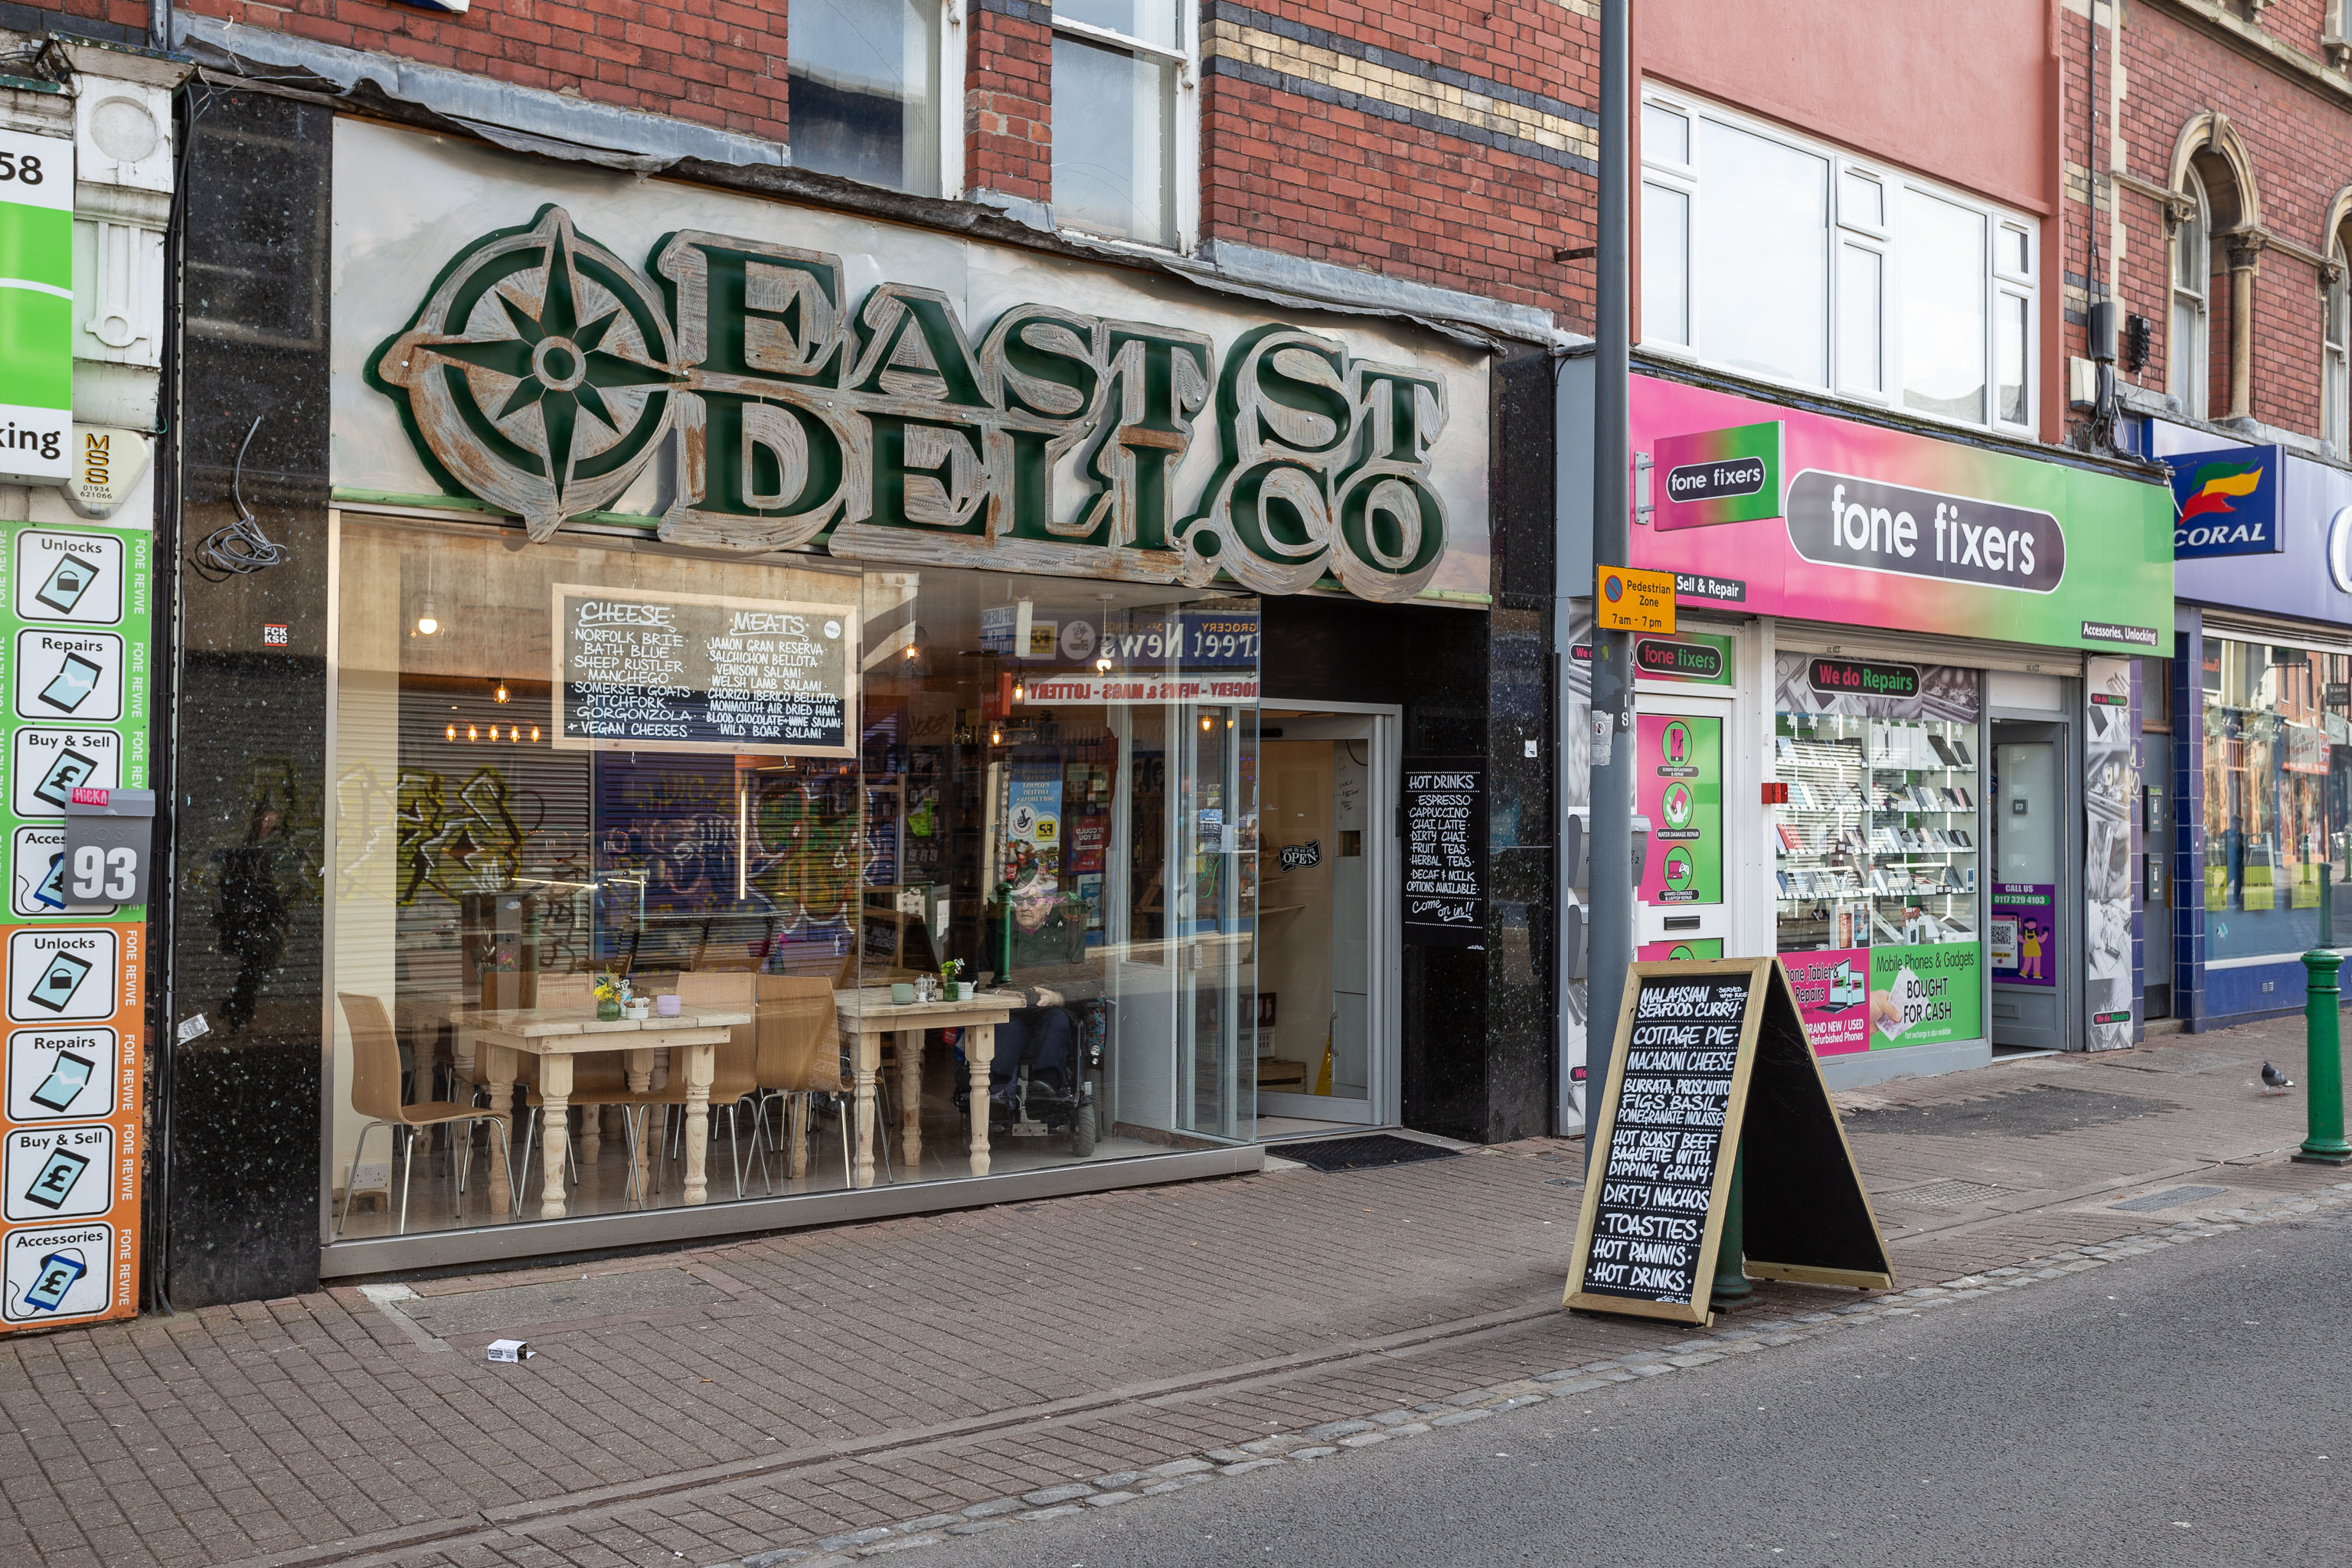 East Street Deli
It's a strange mix of shops. This rather high-end sounding deli is sandwiched between two mobile phone repair places.
